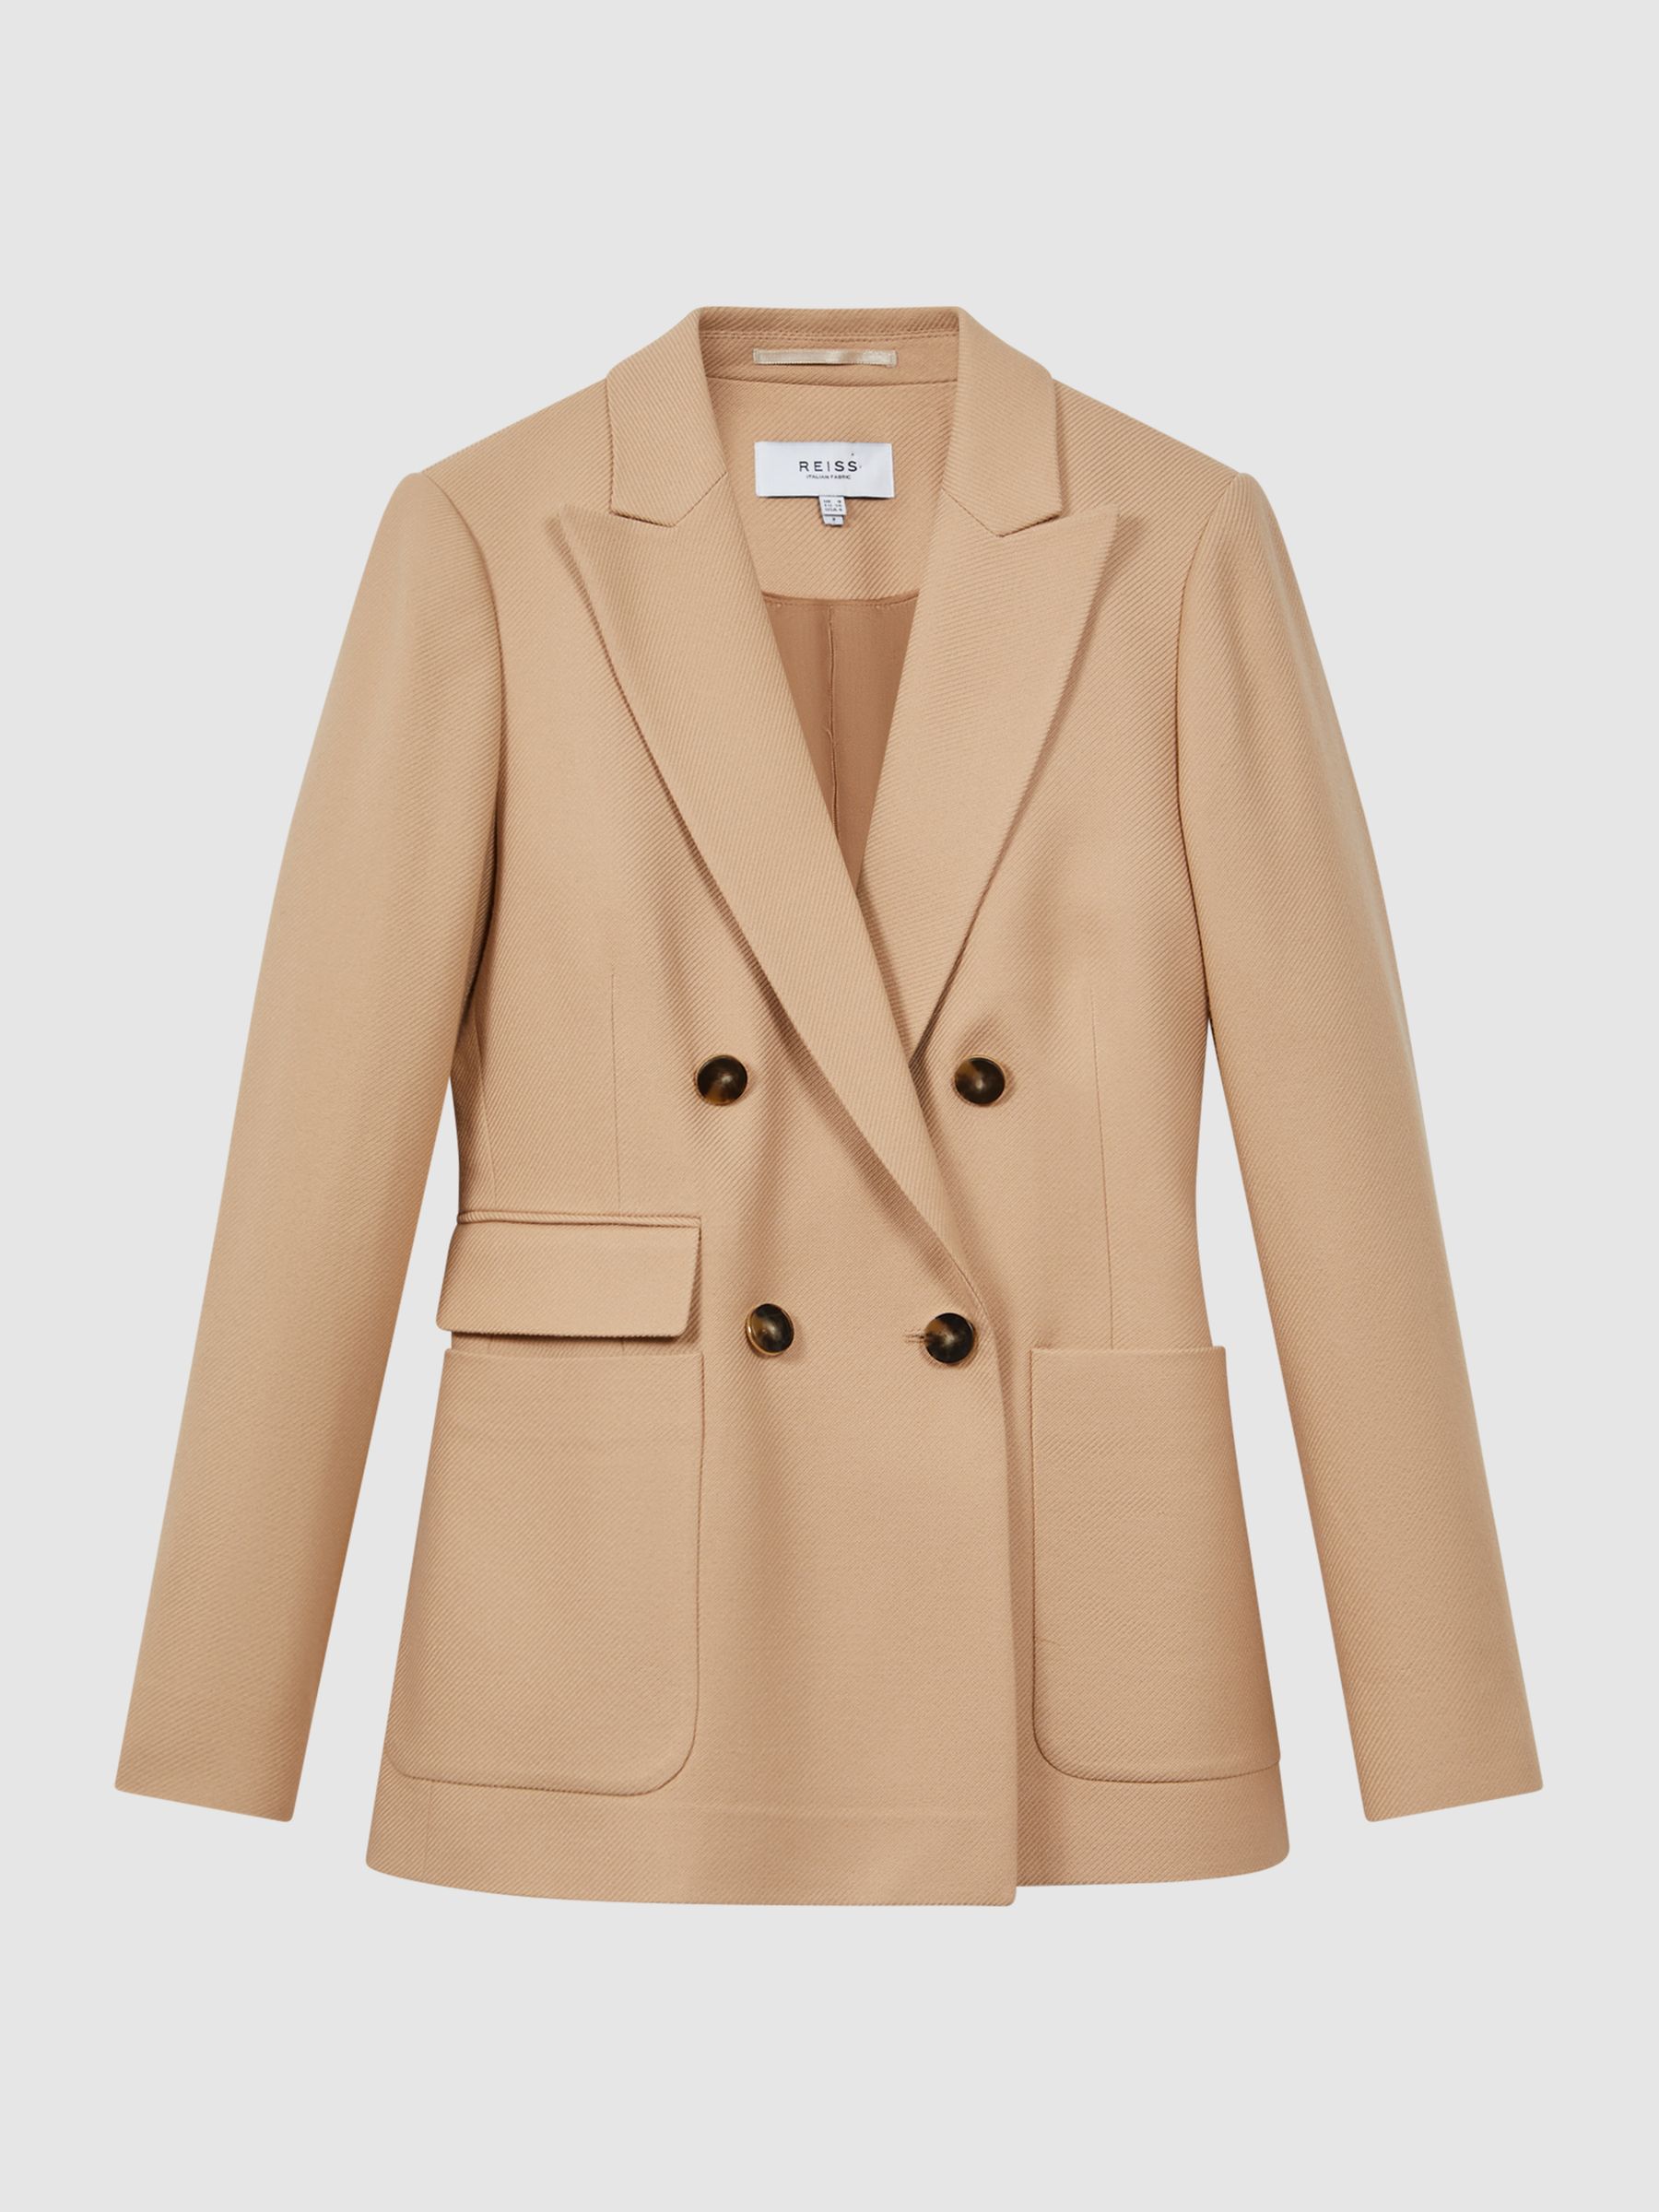 Reiss Larsson Double Breasted Twill Blazer - REISS